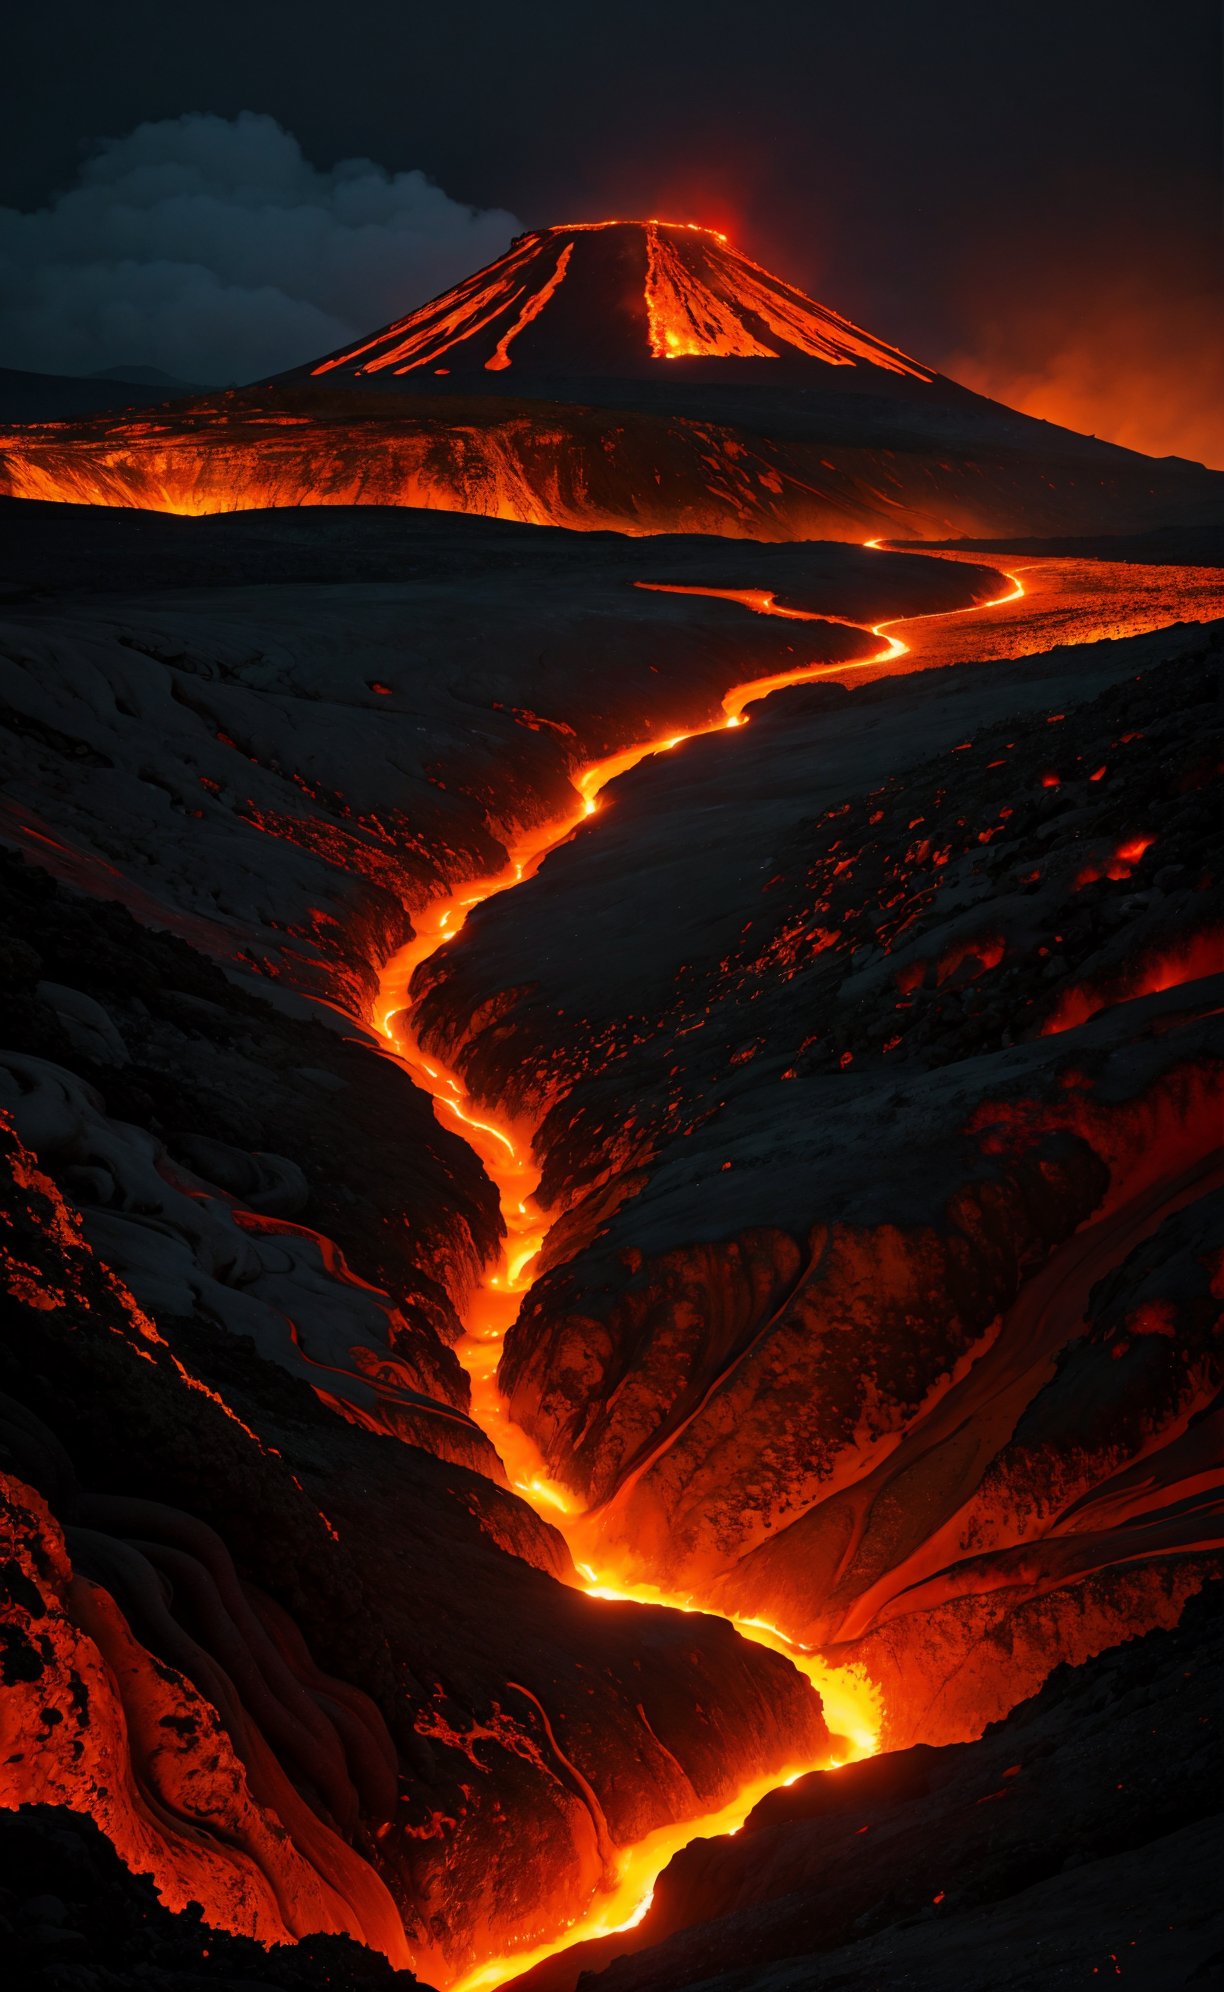 Spectacular, volcanic landscape, billowing smoke, fiery lava, molten rivers, glowing night, 9:16 vertical capture, apocalyptic scenery, award-winning image, Sony A7R IV, high dynamic range, dramatic contrast, dangerous beauty, inhospitable terrain, no life, otherworldly ambiance.